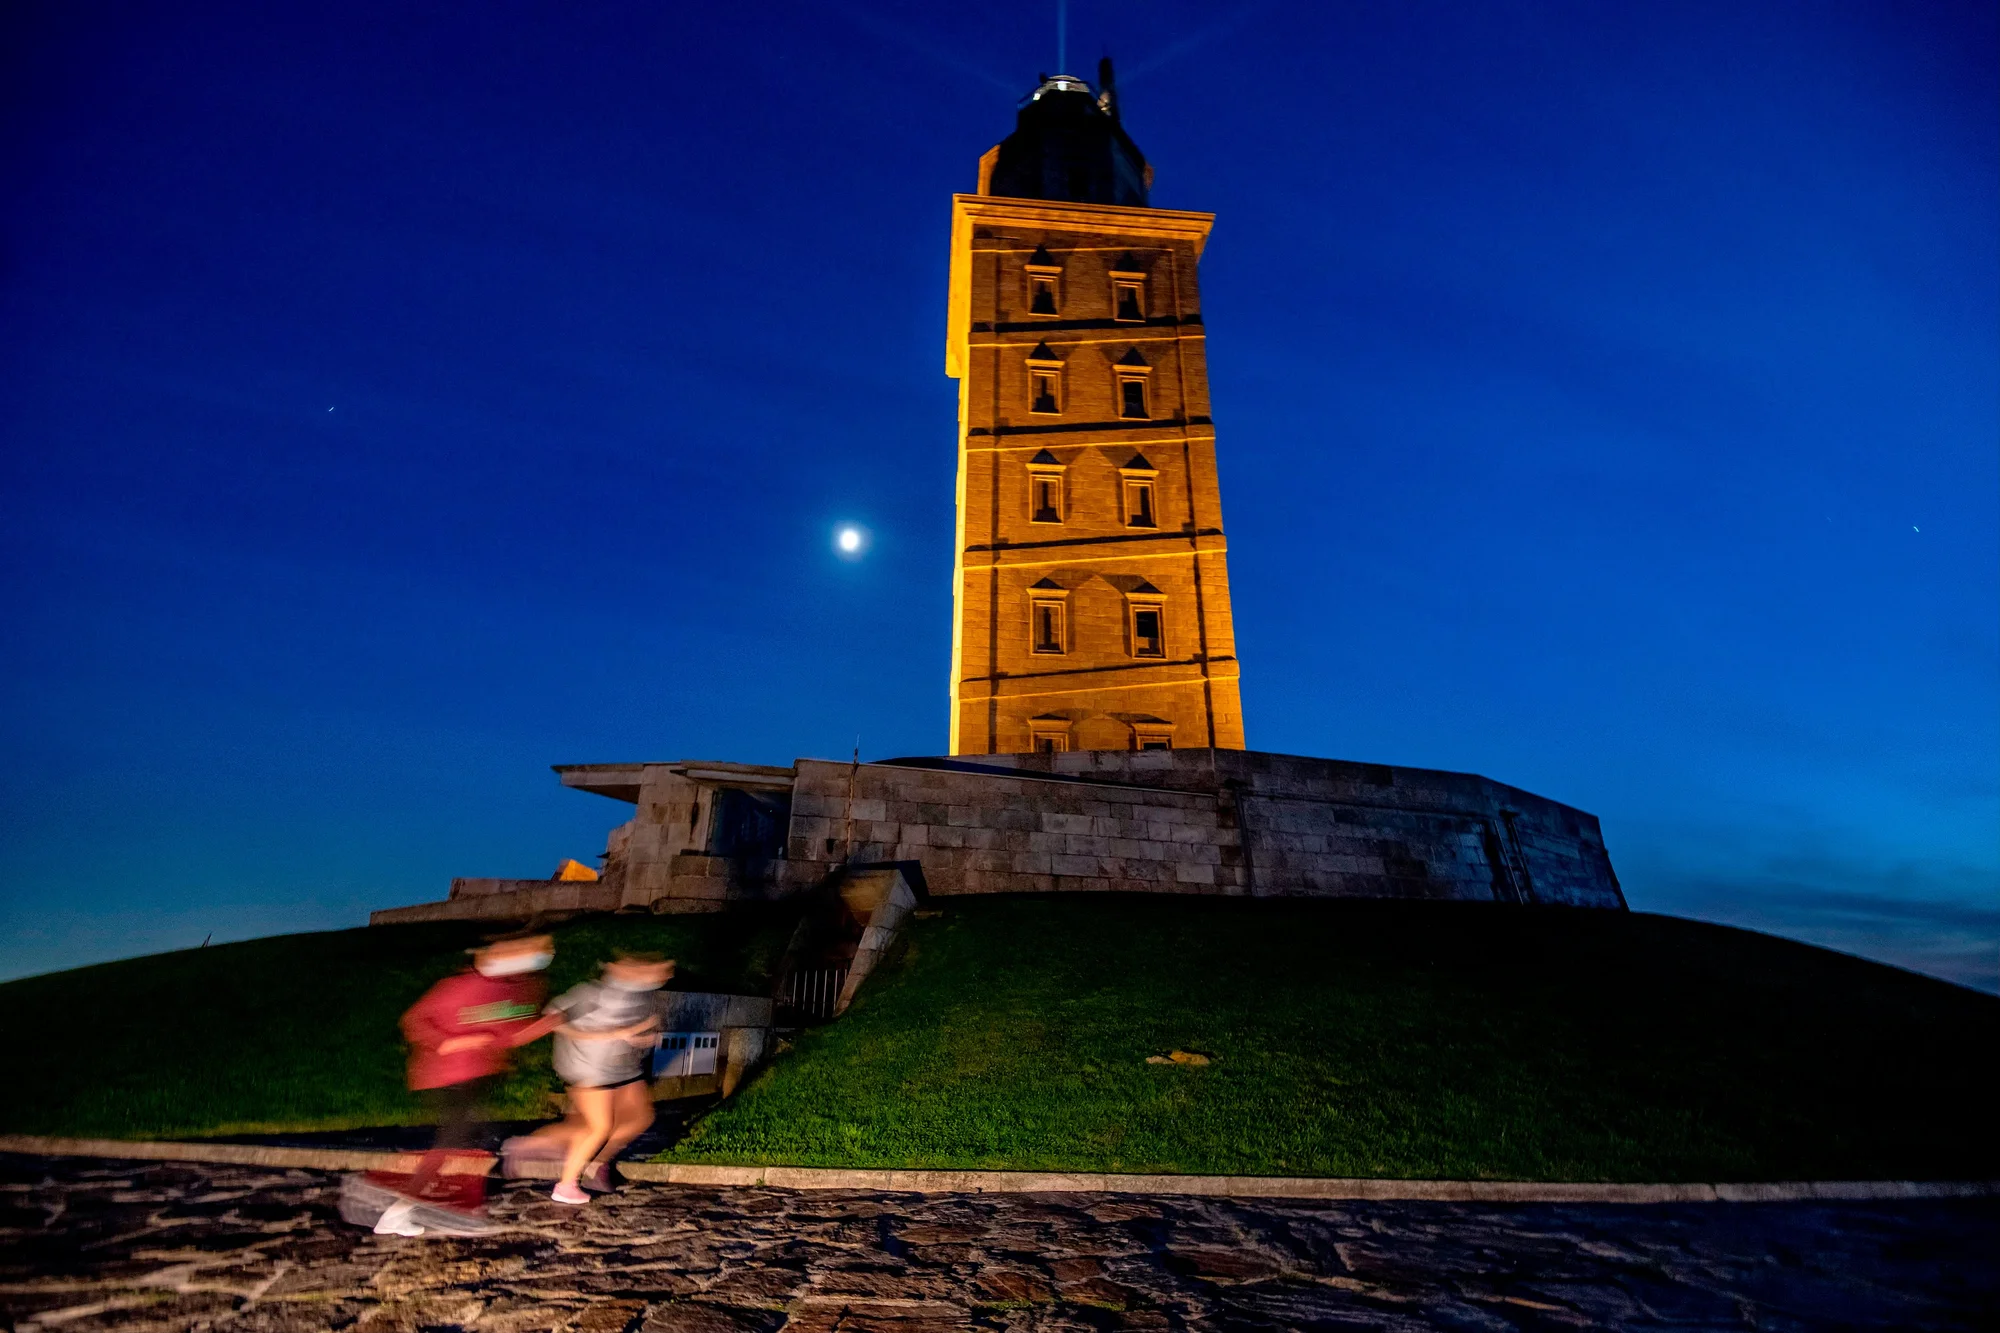 A photograph of the tower of hercules, an ancient Roman lighthouse, captured at night. Two blurred people appear in the foreground walking.